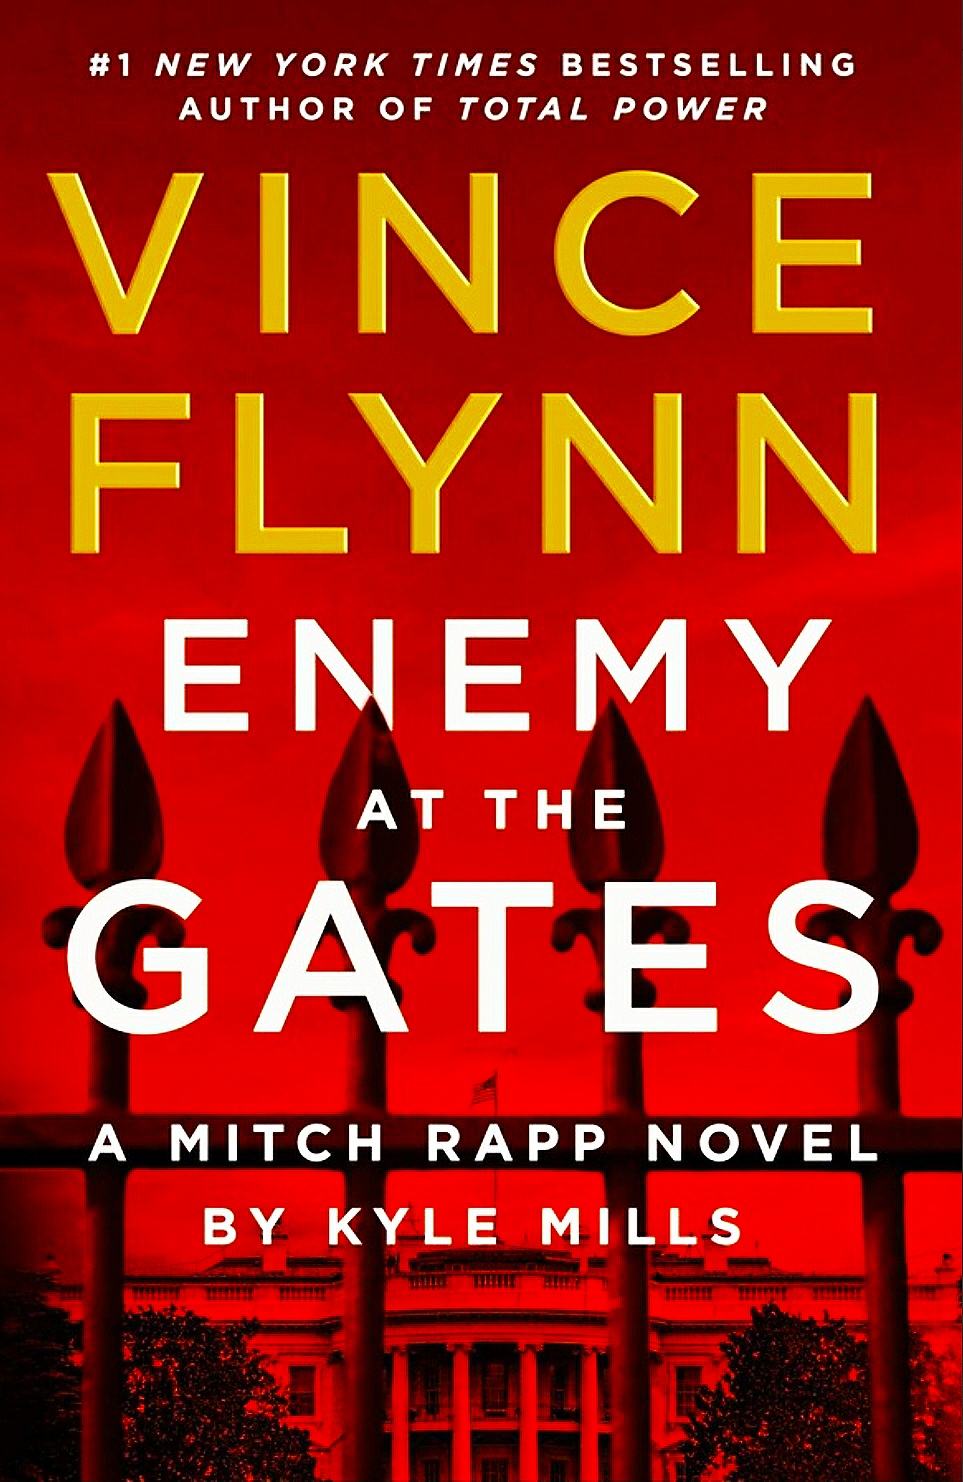 enemy at the gates book cover